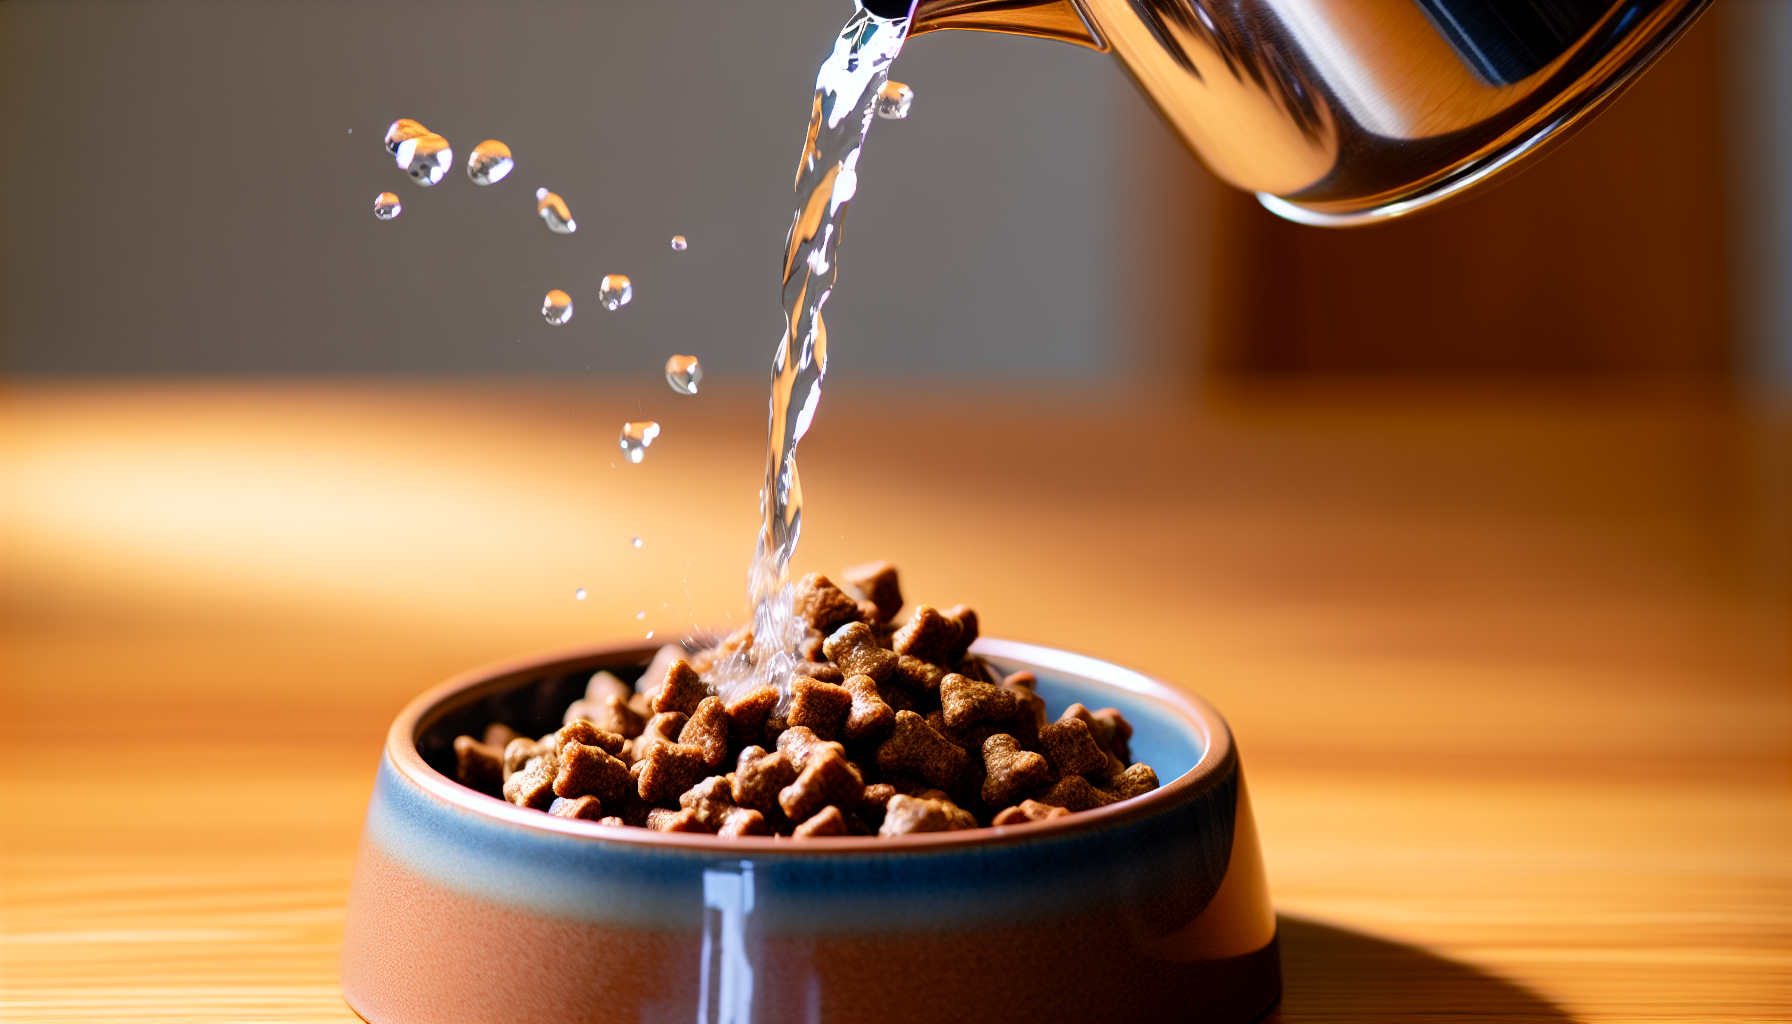 A bowl of dry dog food being moistened with water